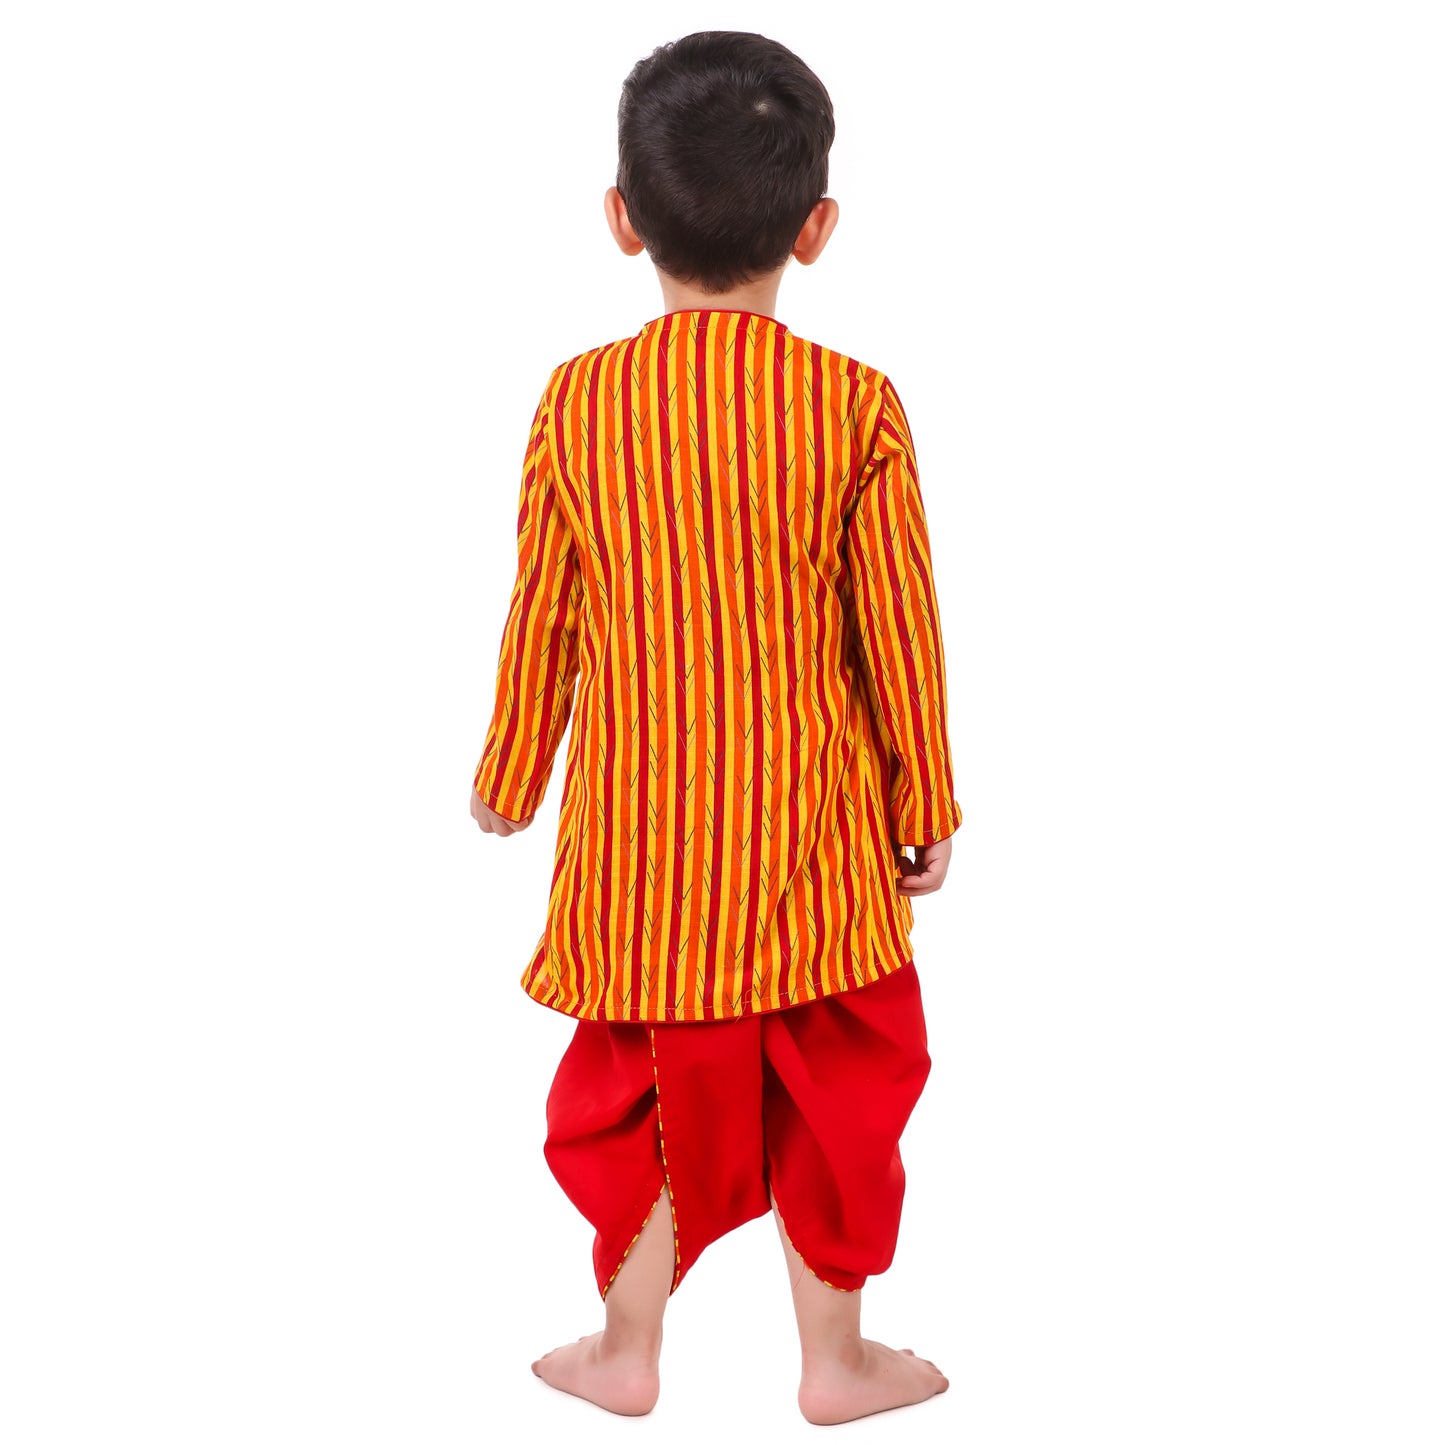 Multicolor Dhoti Kurta for Boys, Ages 3 Months-16 Years, Cotton, Angrakha Style, Striped